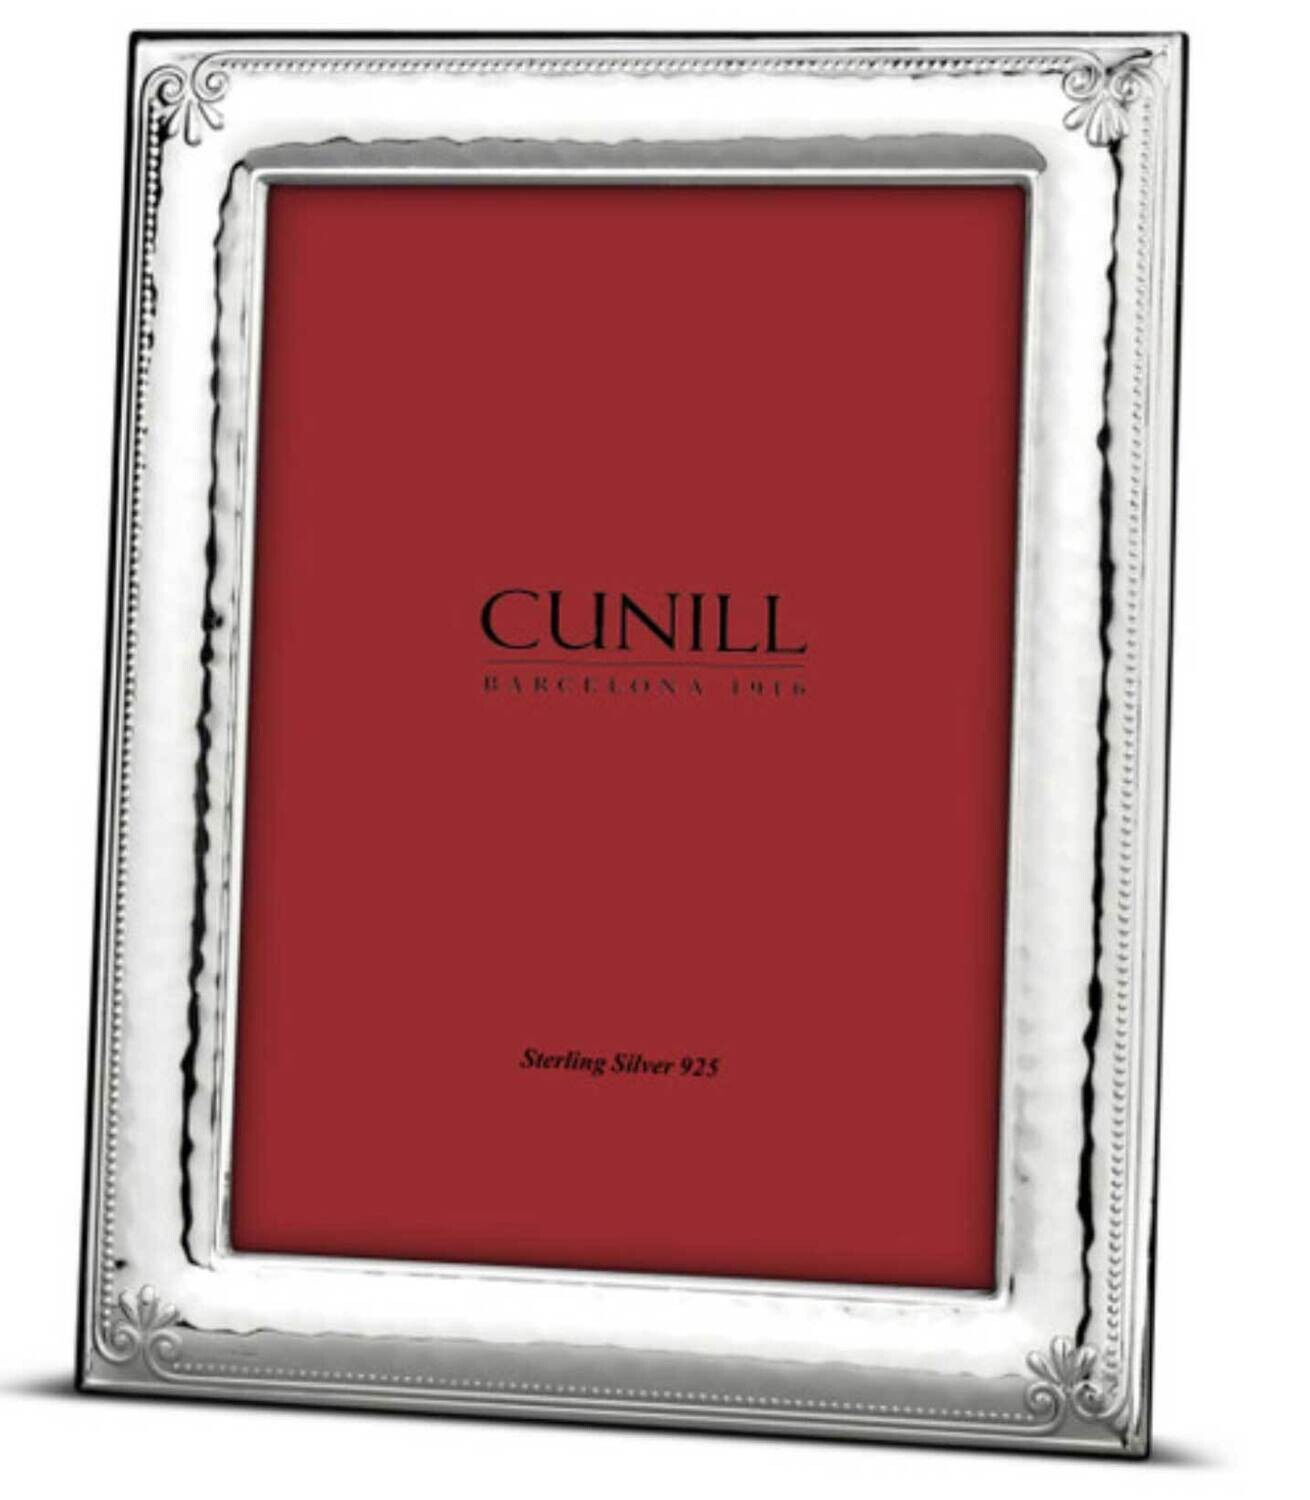 Cunill Ornamental 8x10 Inch Picture Frame .925 Sterling Silver 6179